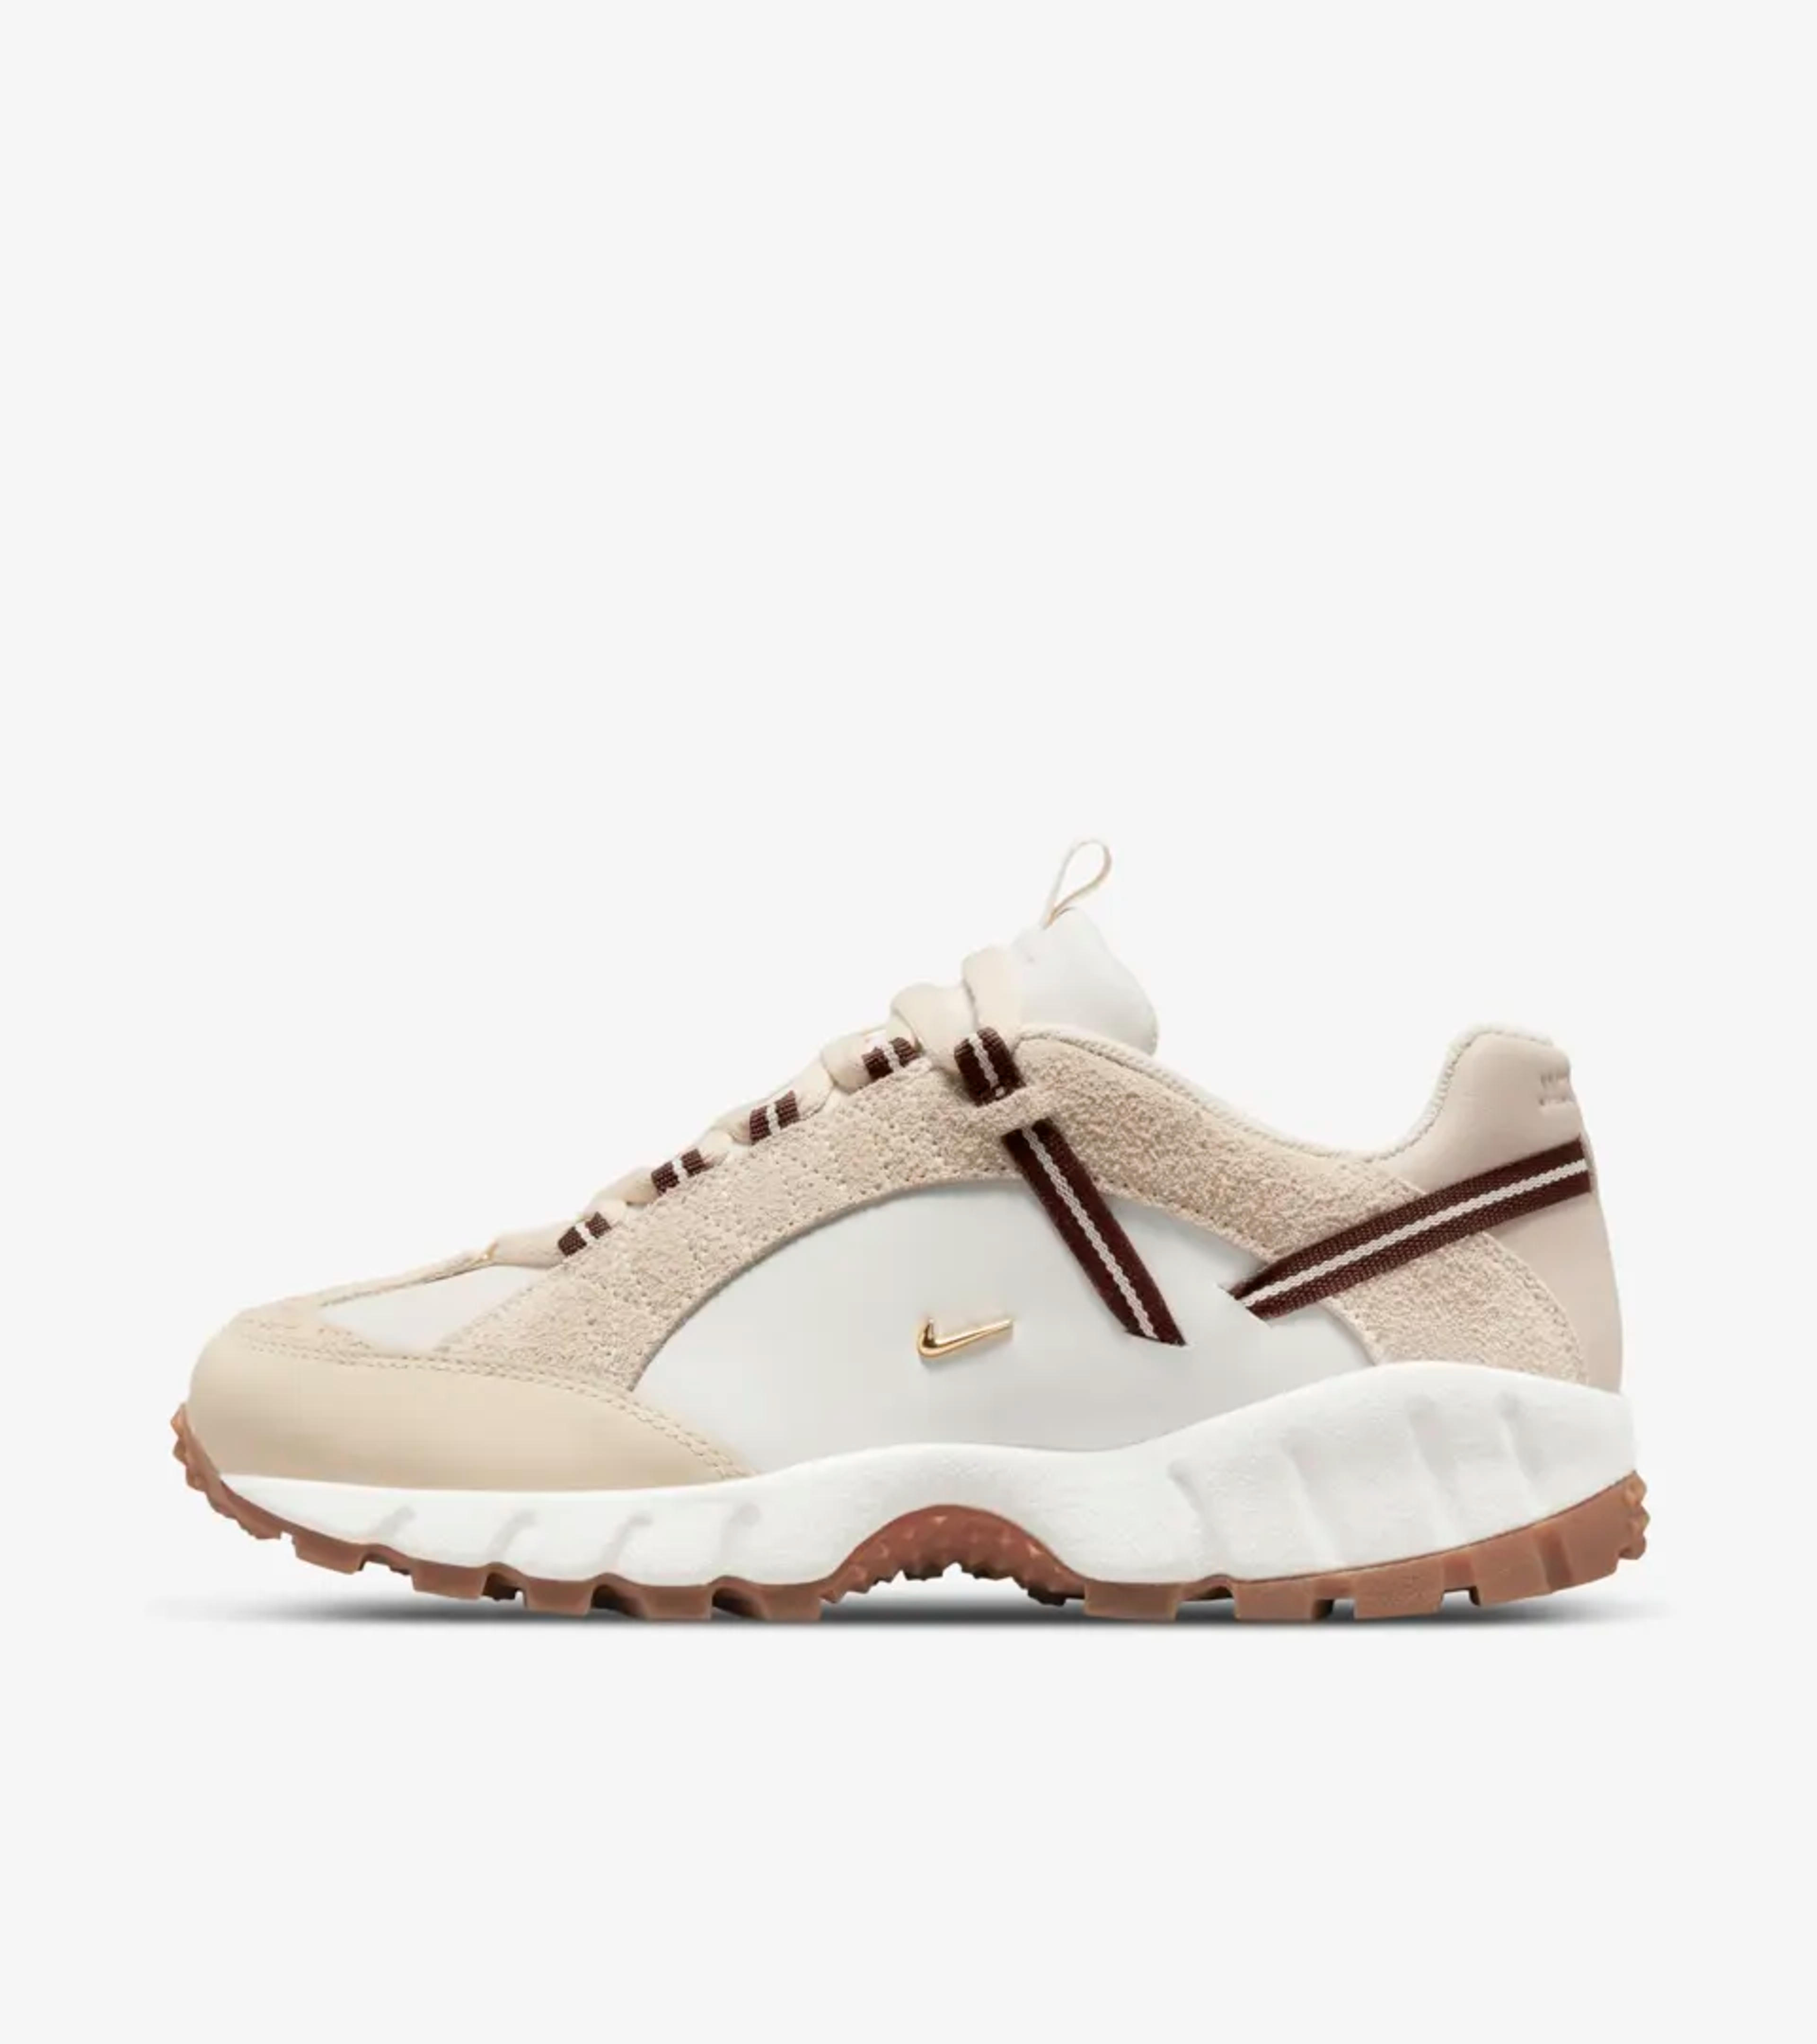 Air Humara x Jacquemus 'Light Bone and Gold' (DR0420-001) Release Date. Nike SNKRS